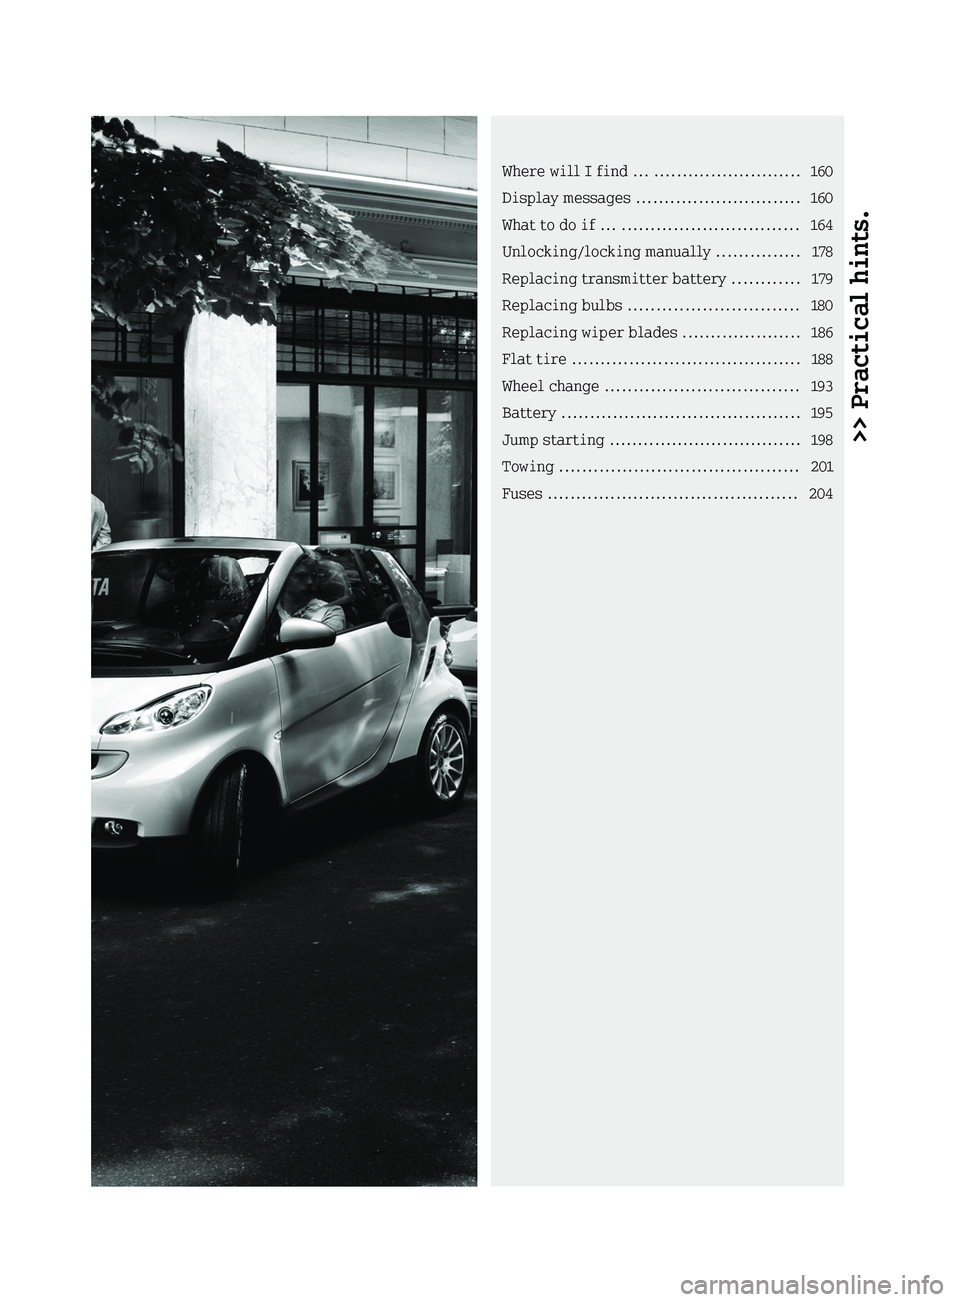 SMART FORTWO COUPE 2011  Owners Manual >> Practical hints.Where will I find ... ..........................160
Display messages .............................160
What to do if ... ...............................164
Unlocking/locking manually